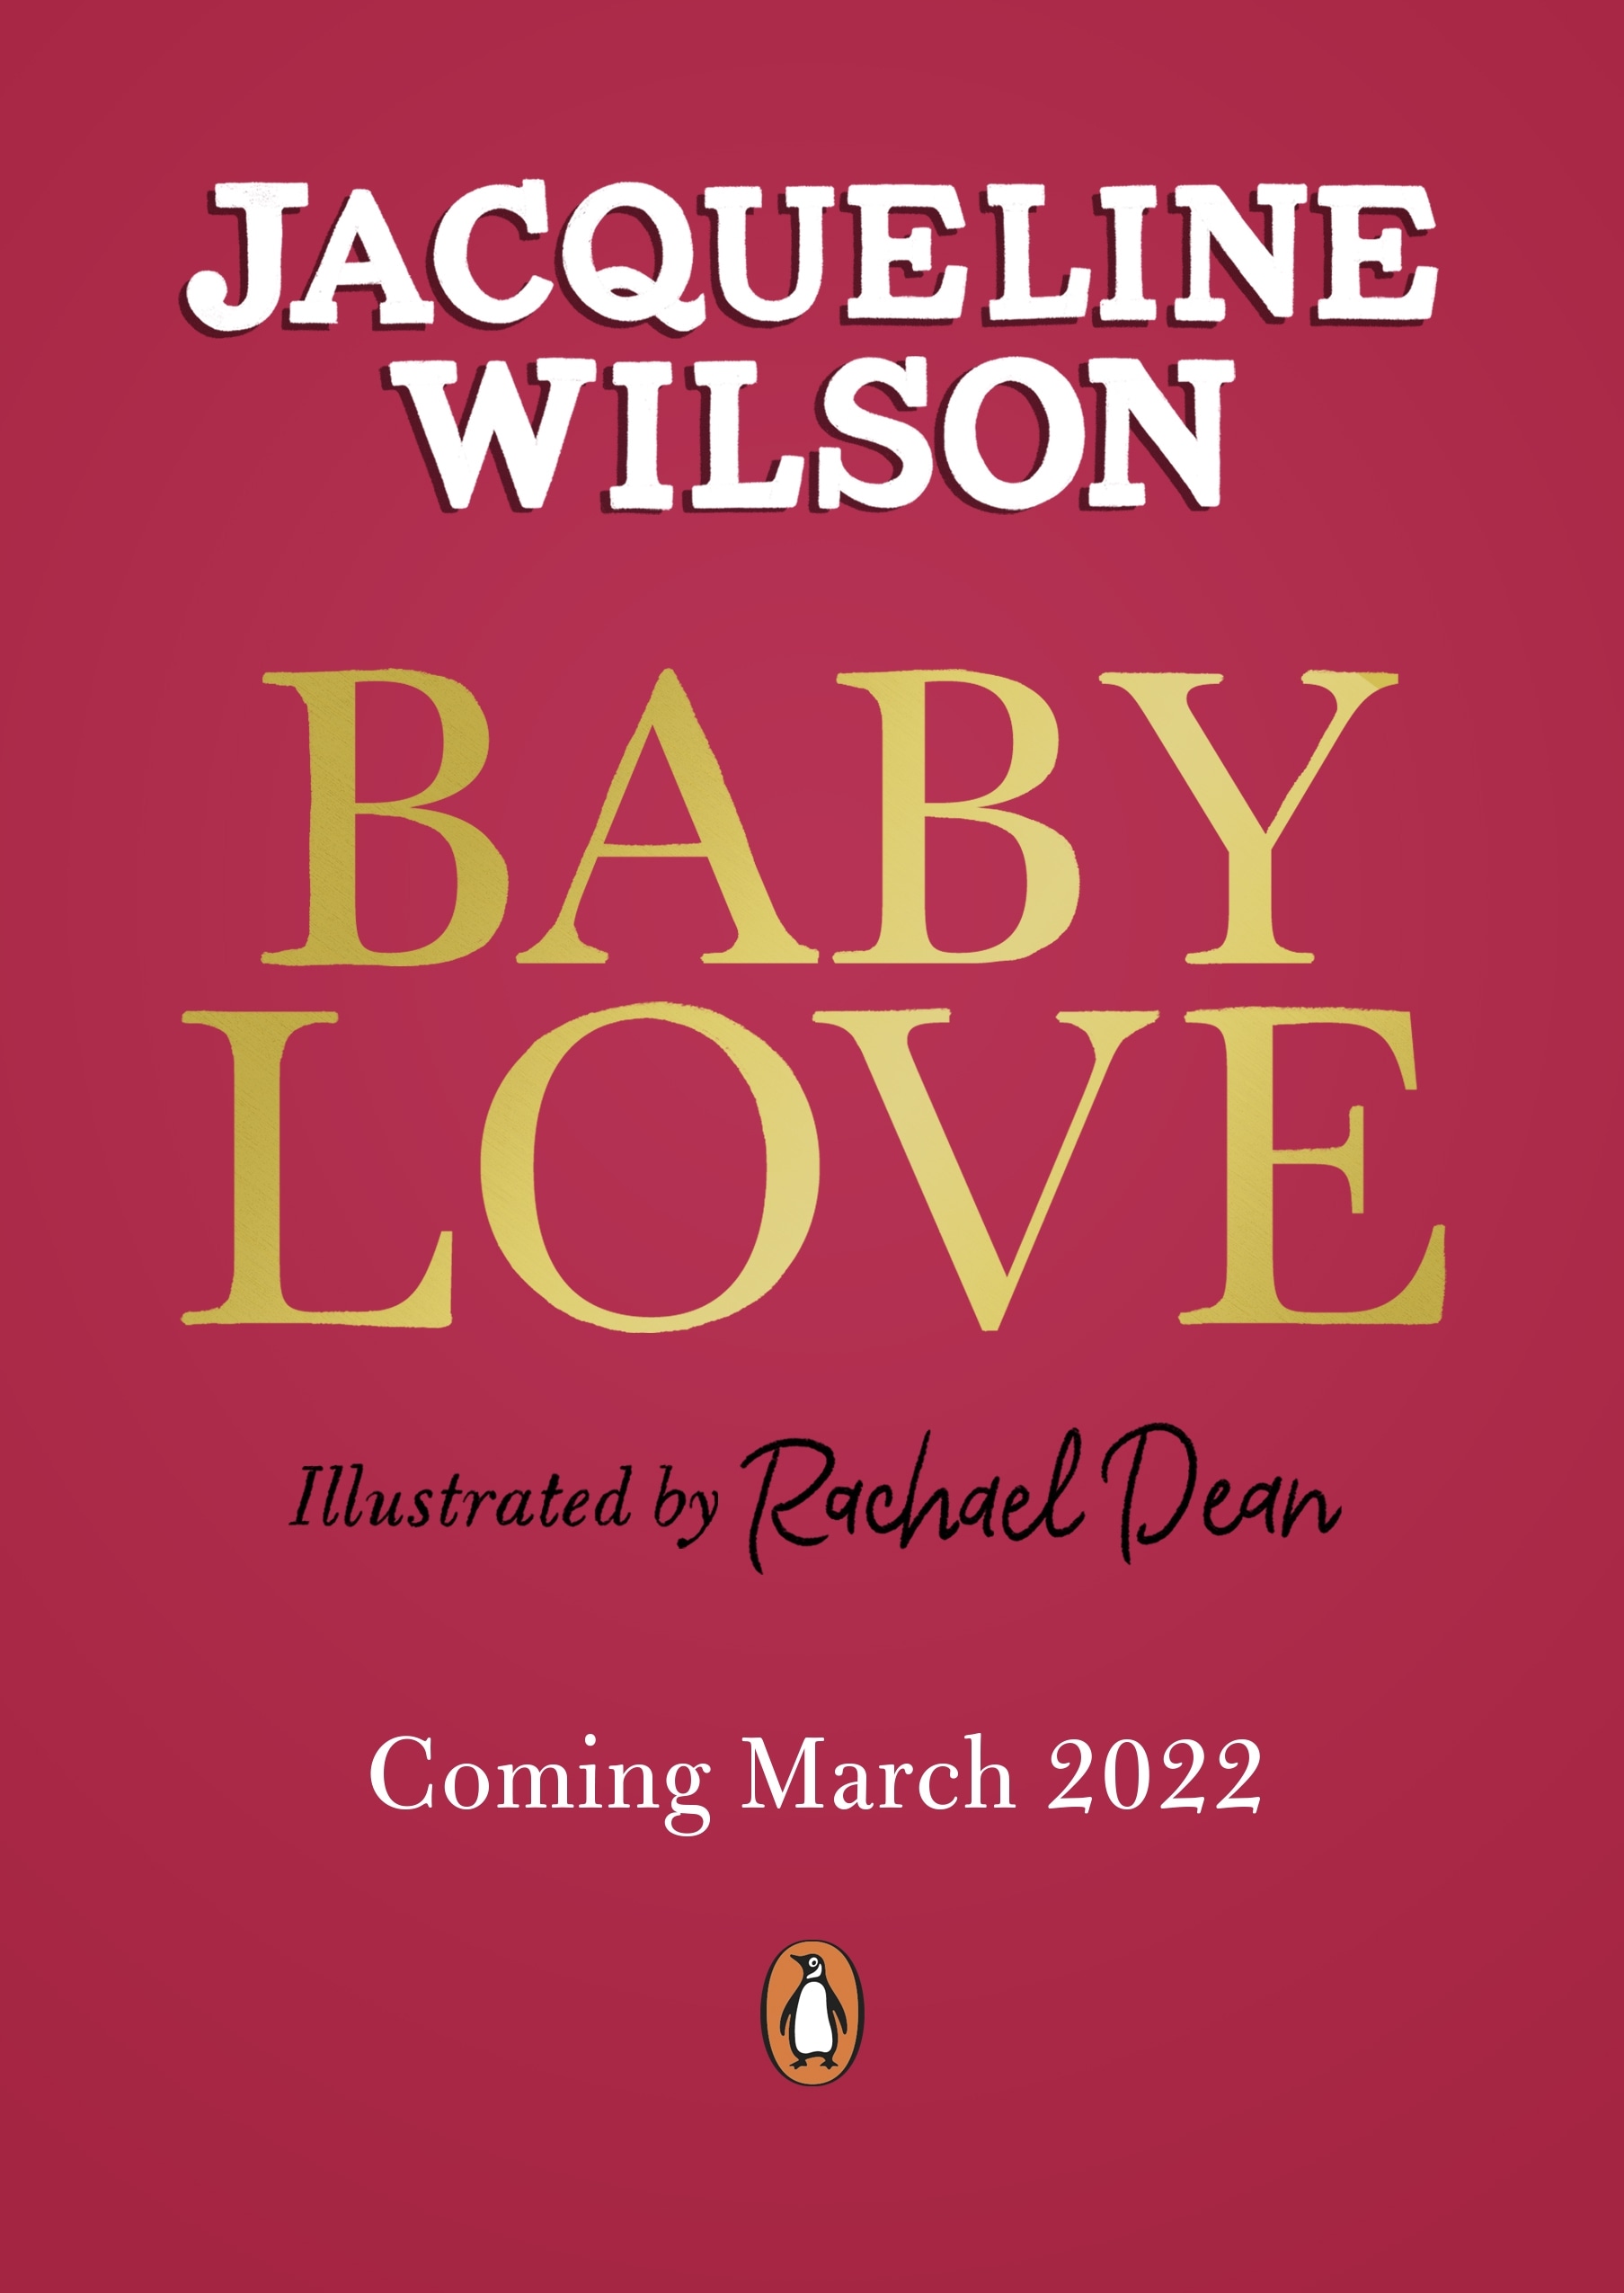 Book “Baby Love” by Jacqueline Wilson — March 17, 2022